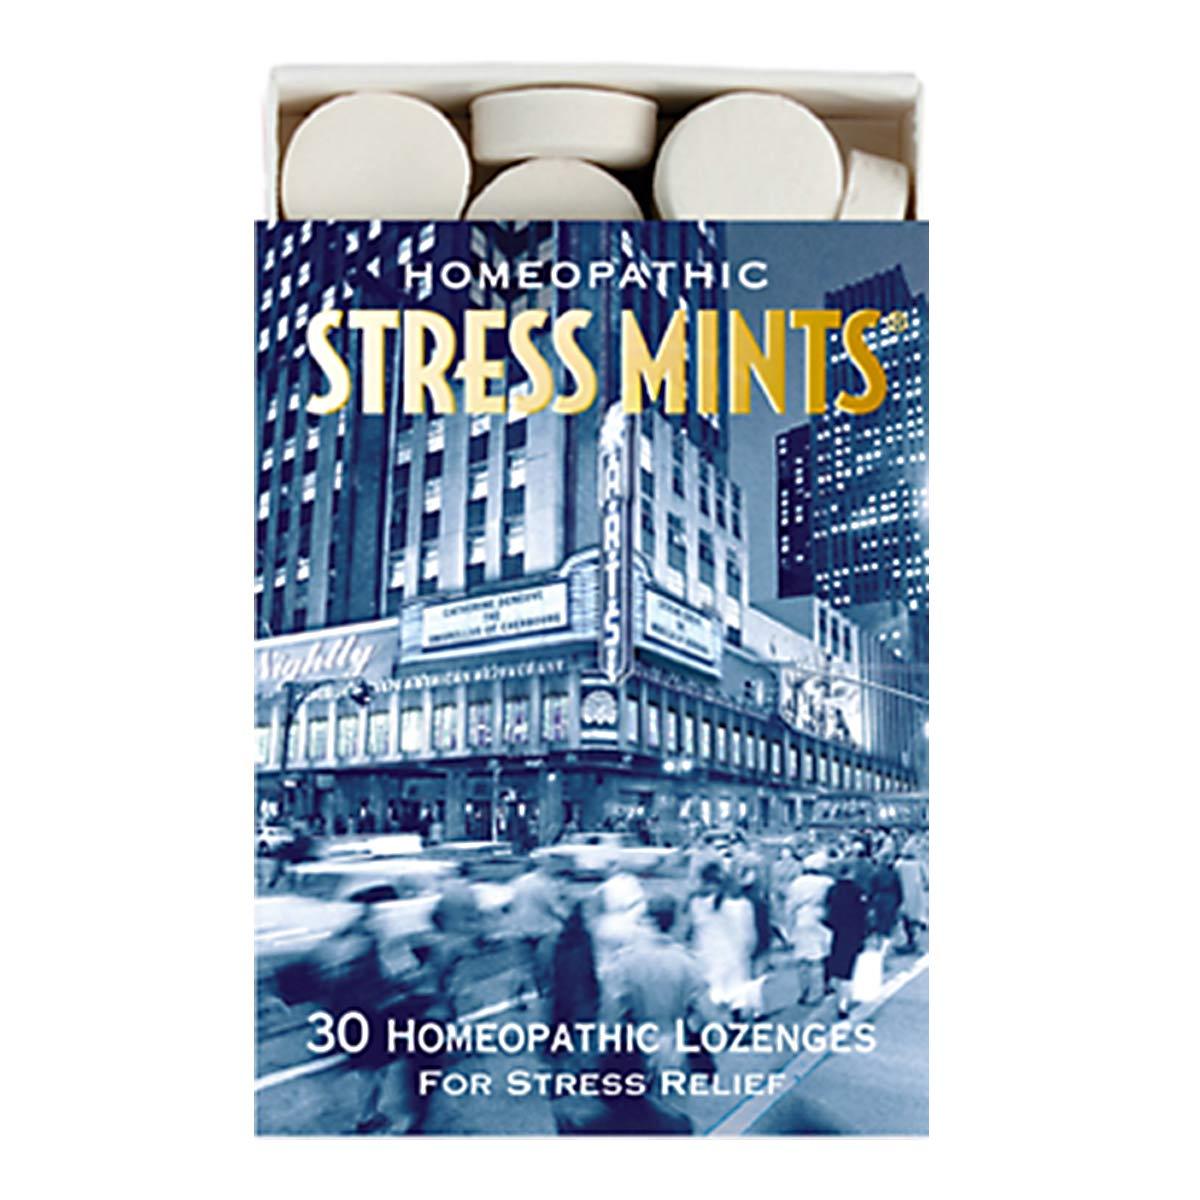 Primary image of Stress Mints